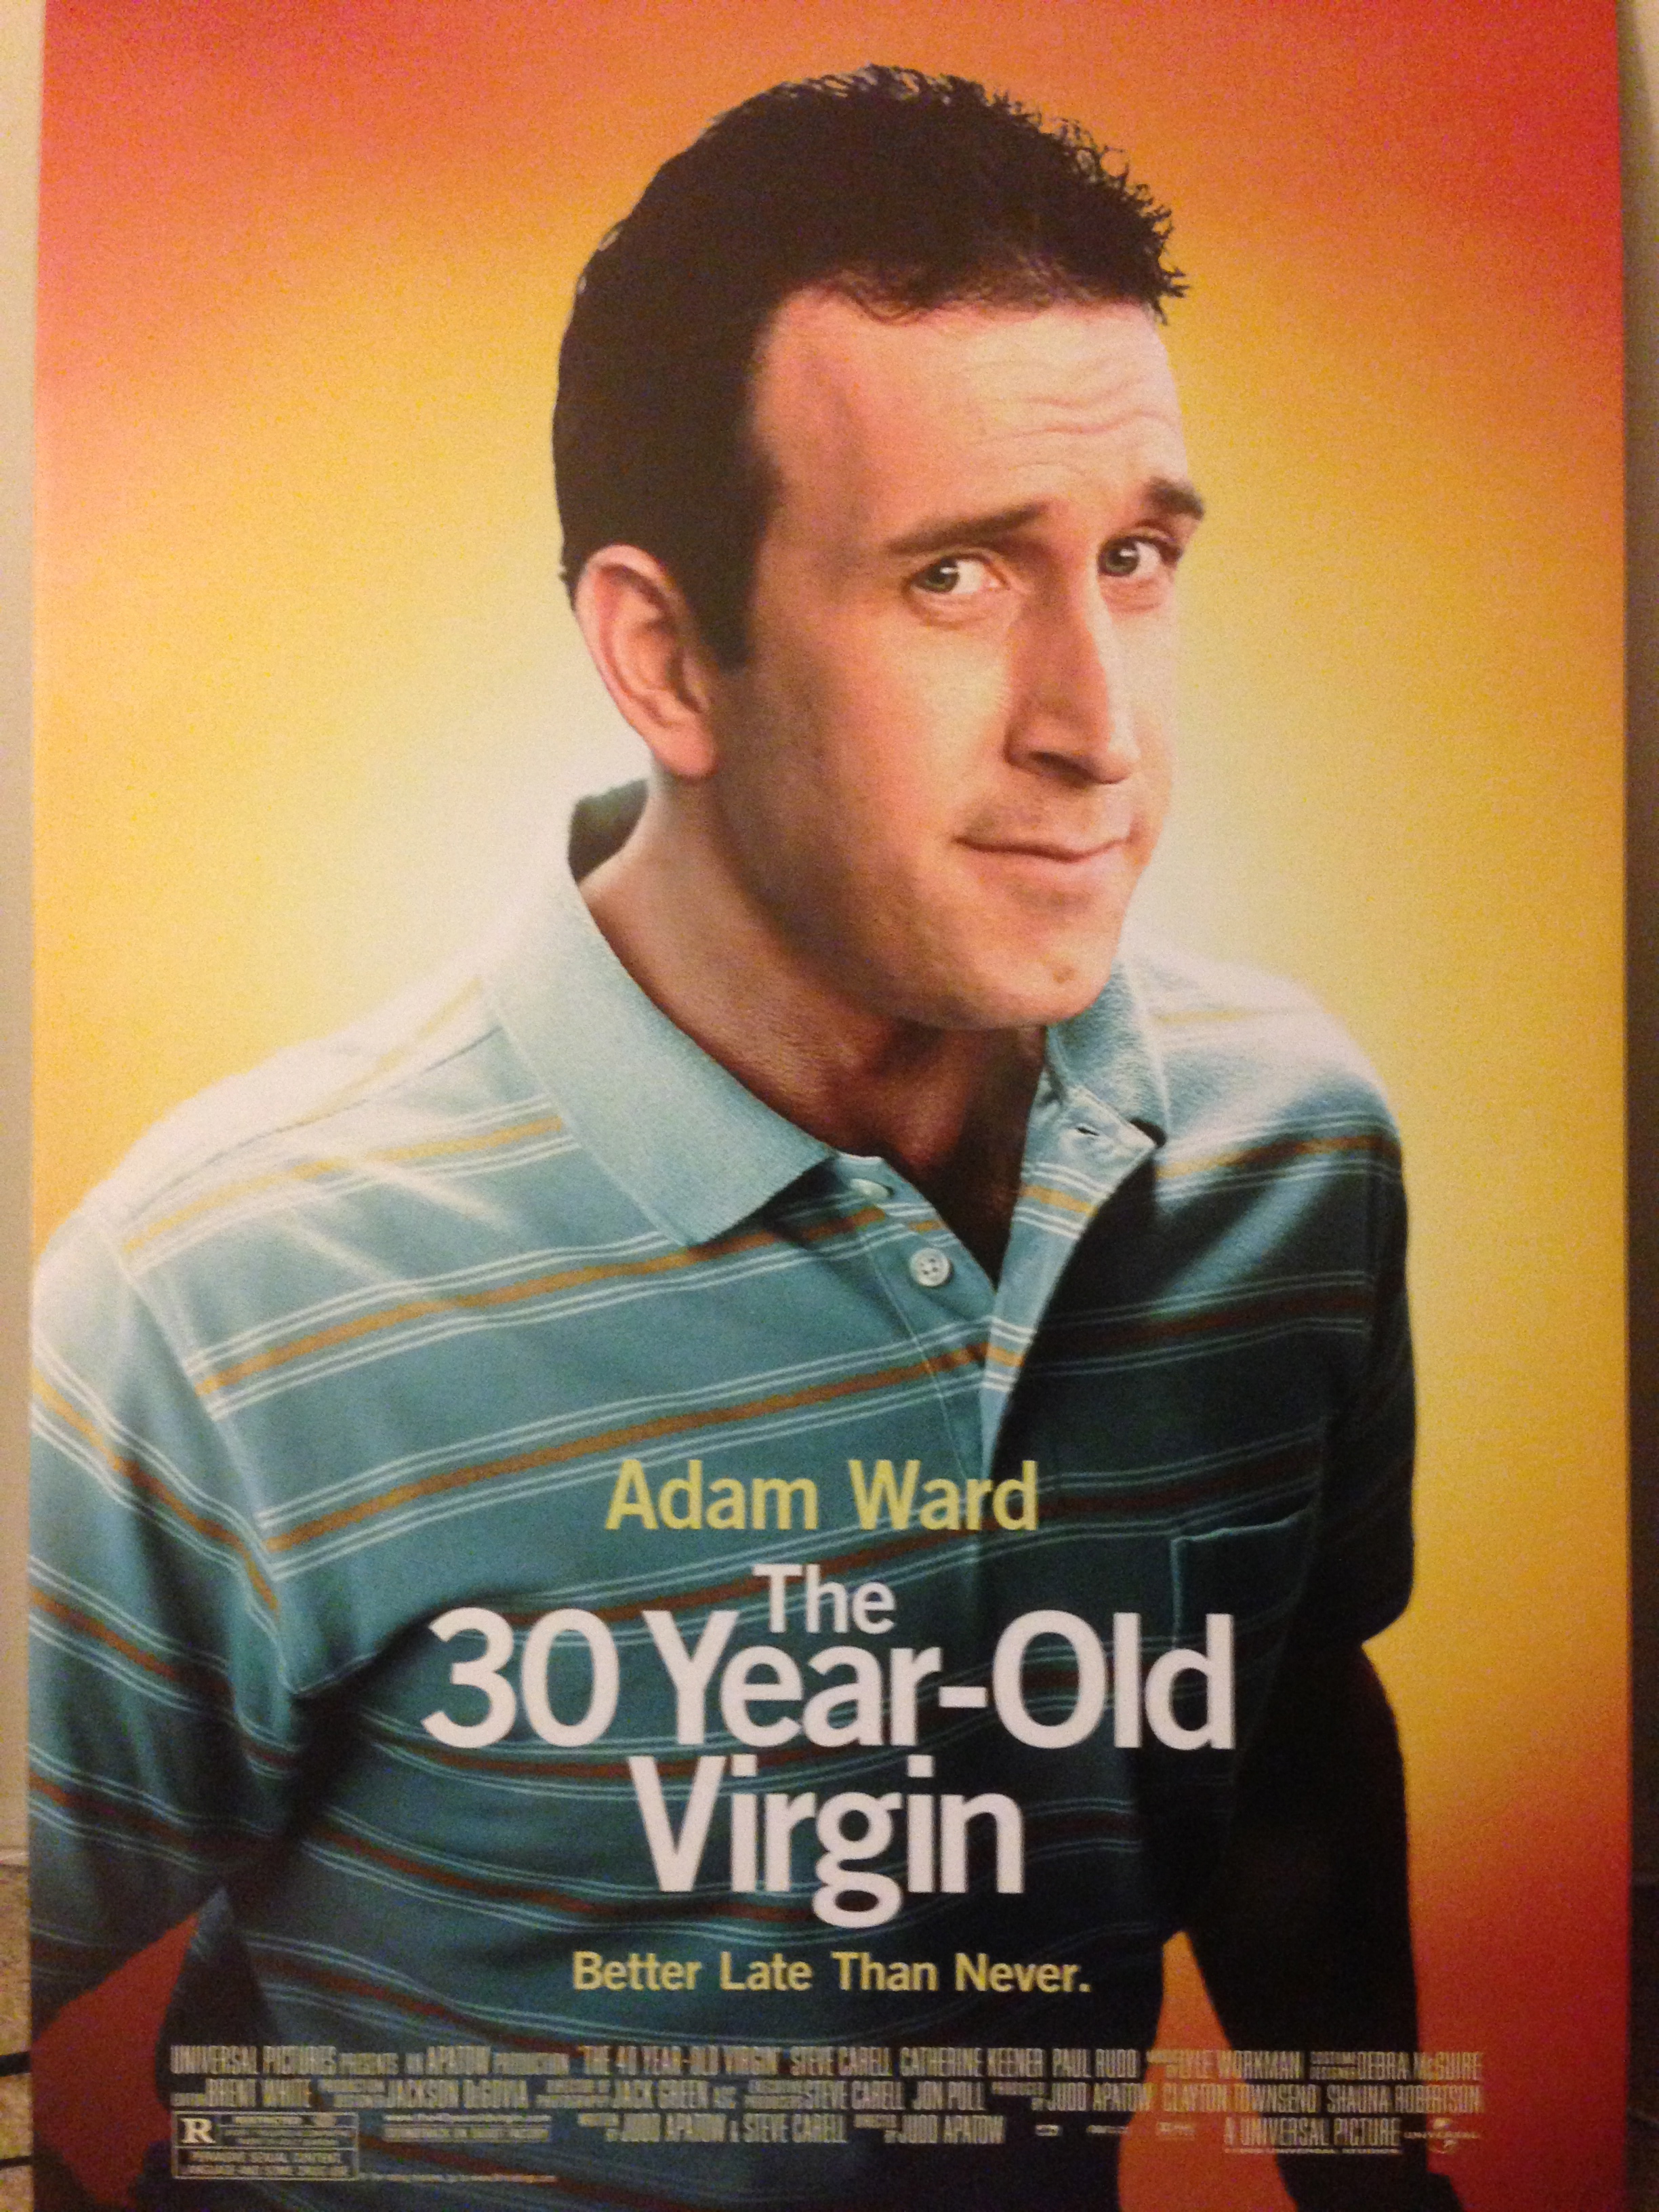 A poster from the movie 30 year old virgin